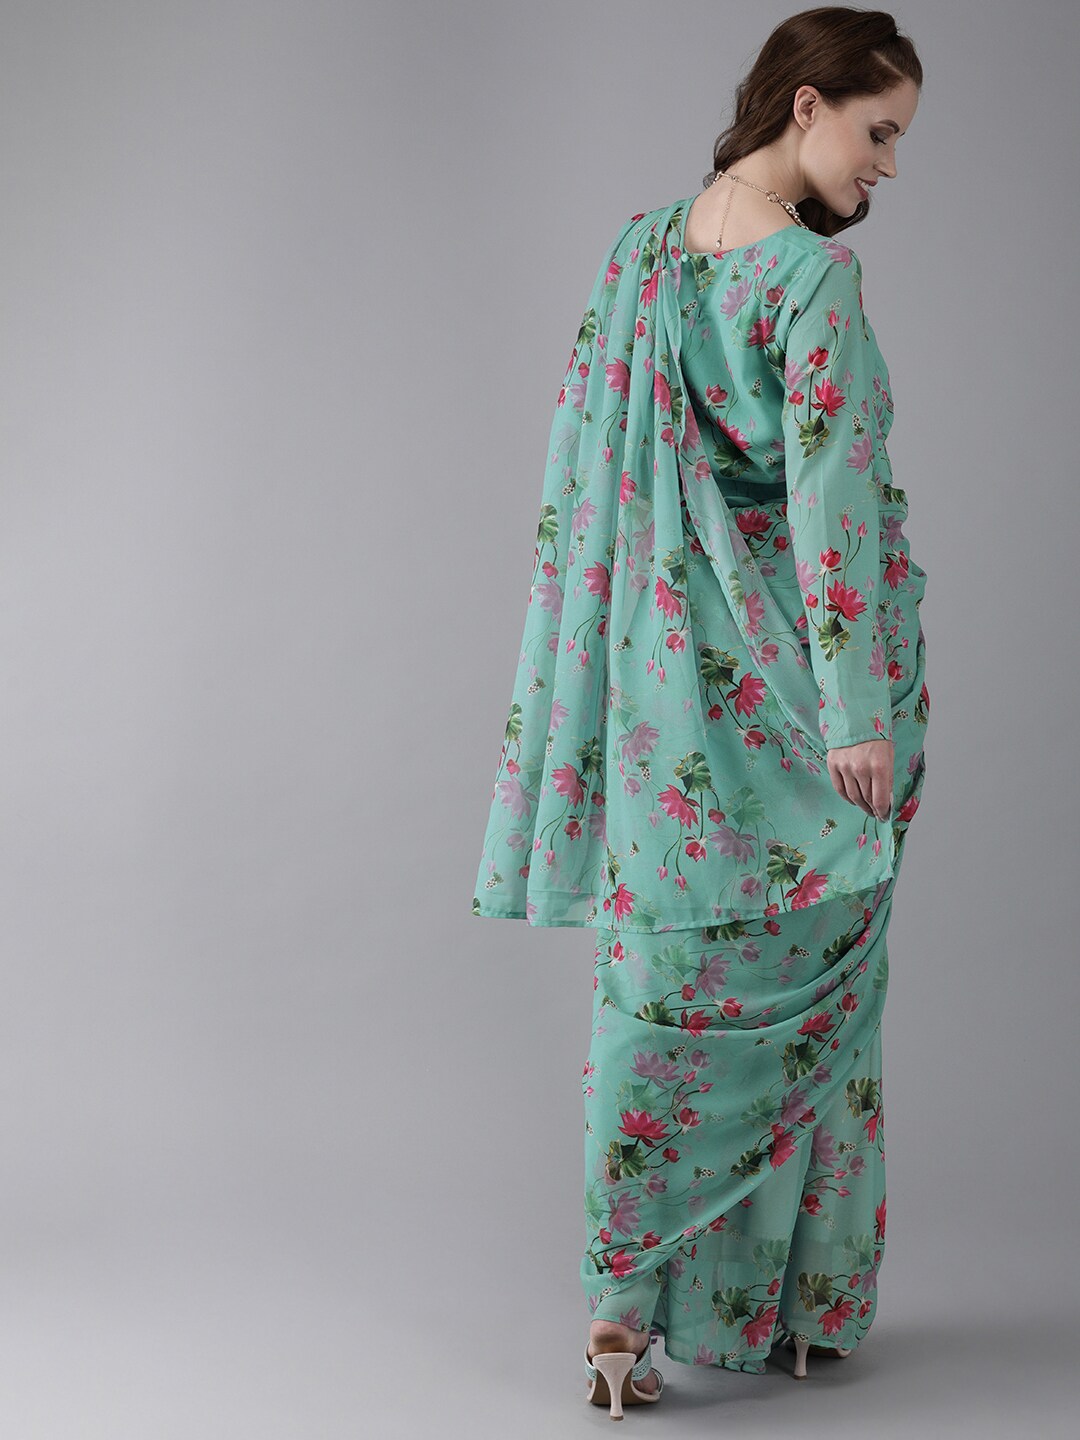 Women's Green Floral Print Saree With Blouse Piece - Aks